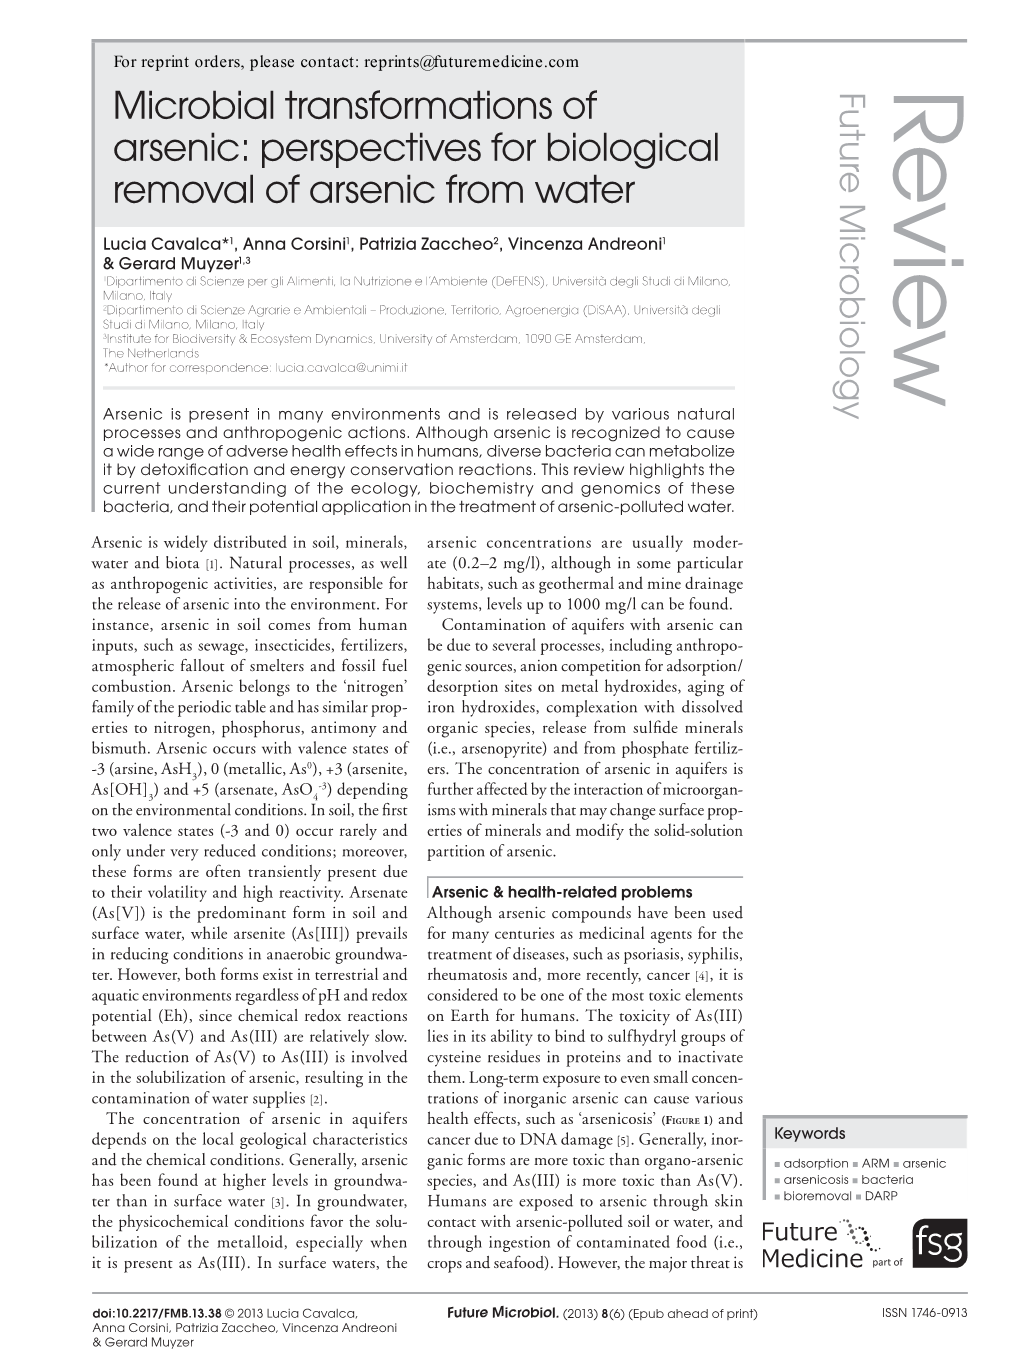 Microbial Transformations of Arsenic: Perspectives for Biological Removal of Arsenic from Water Review Ia Ia Er Er Eobact Eobact